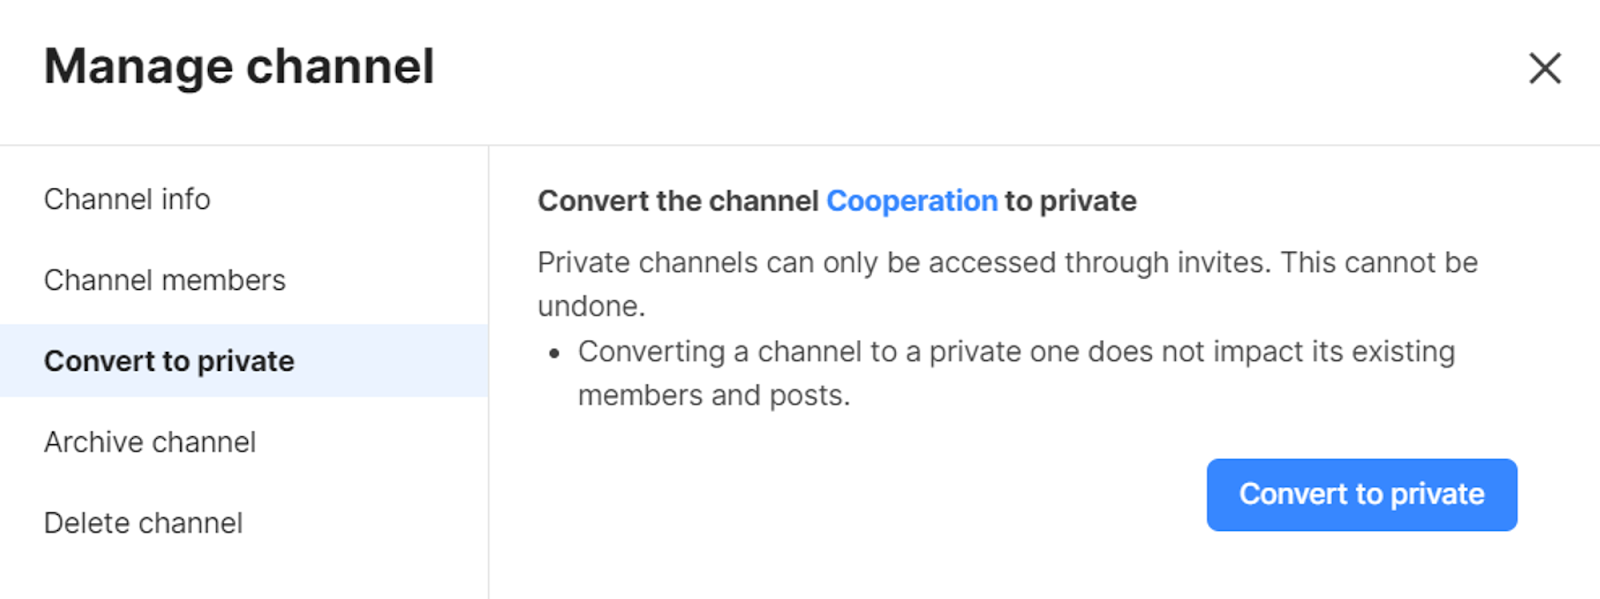 convert-to-private.png